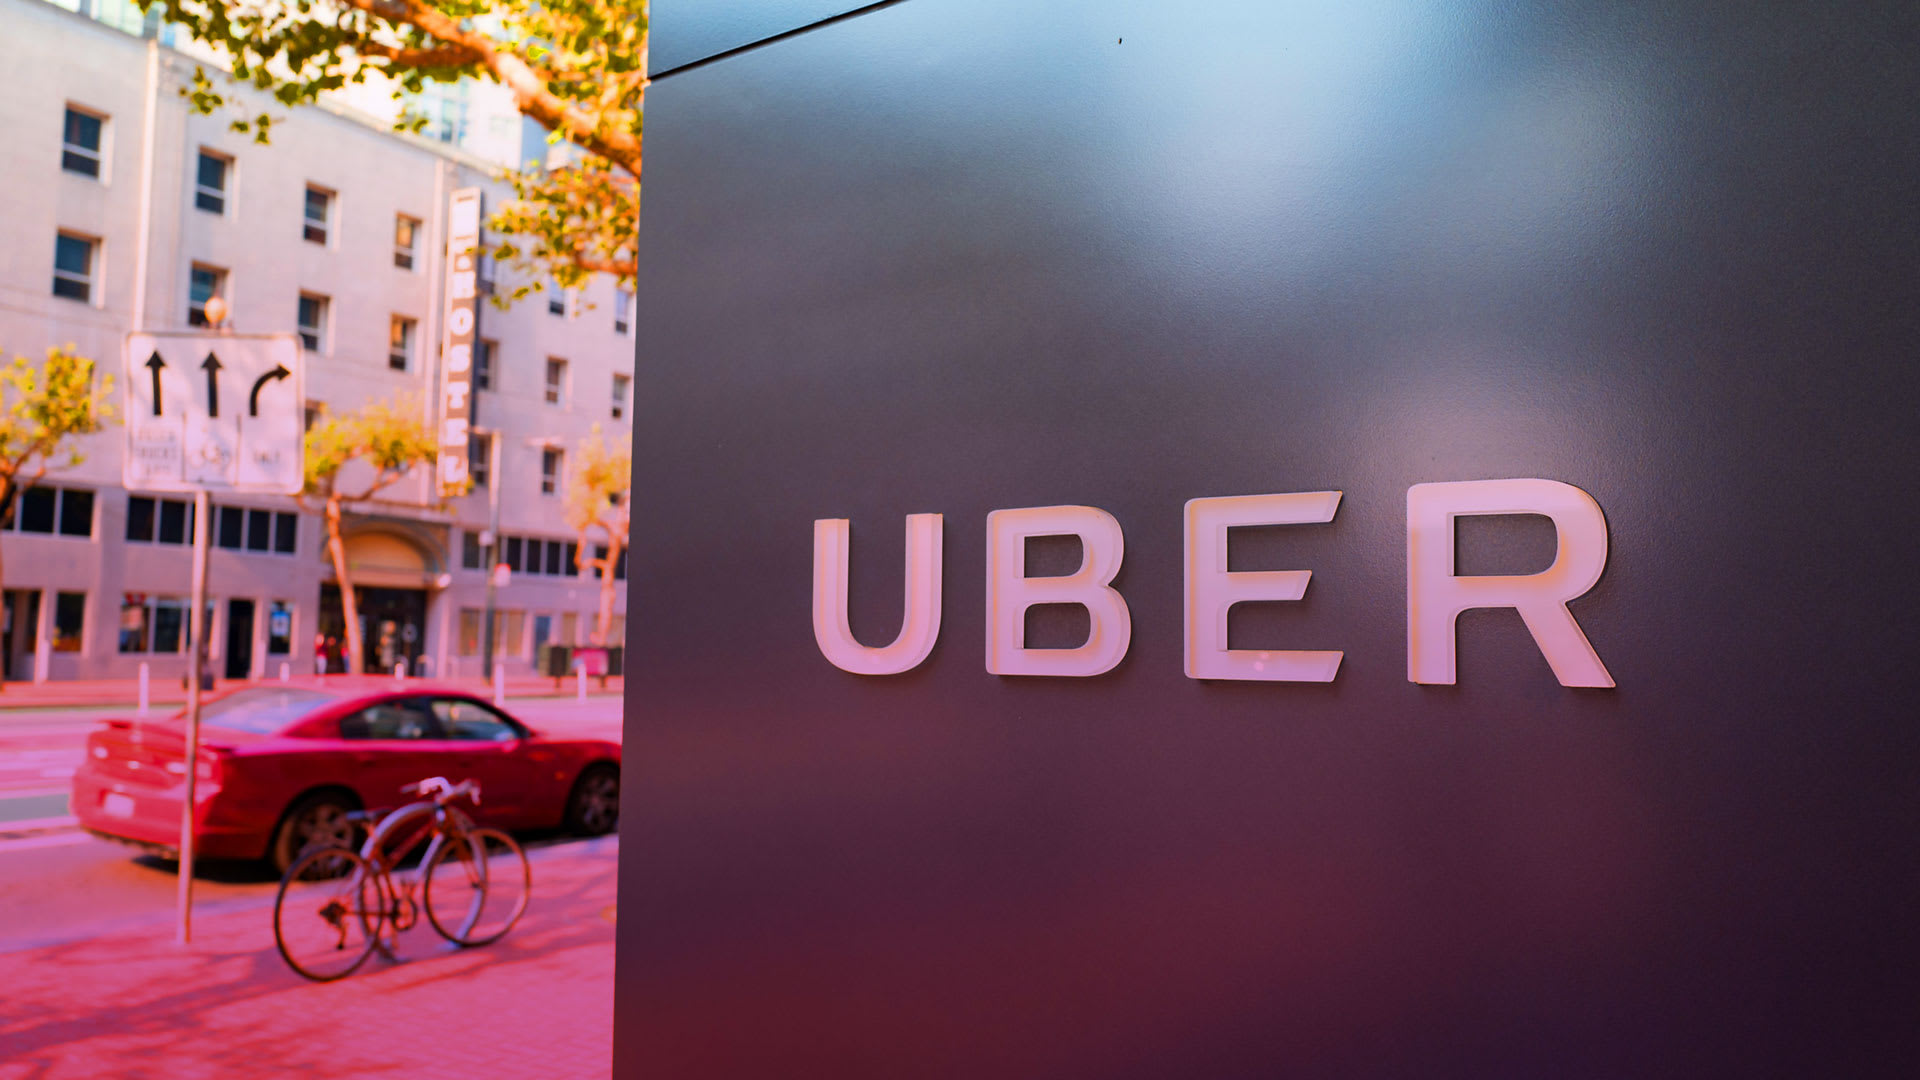 Uber is now facing multiple lawsuits over its huge data breach